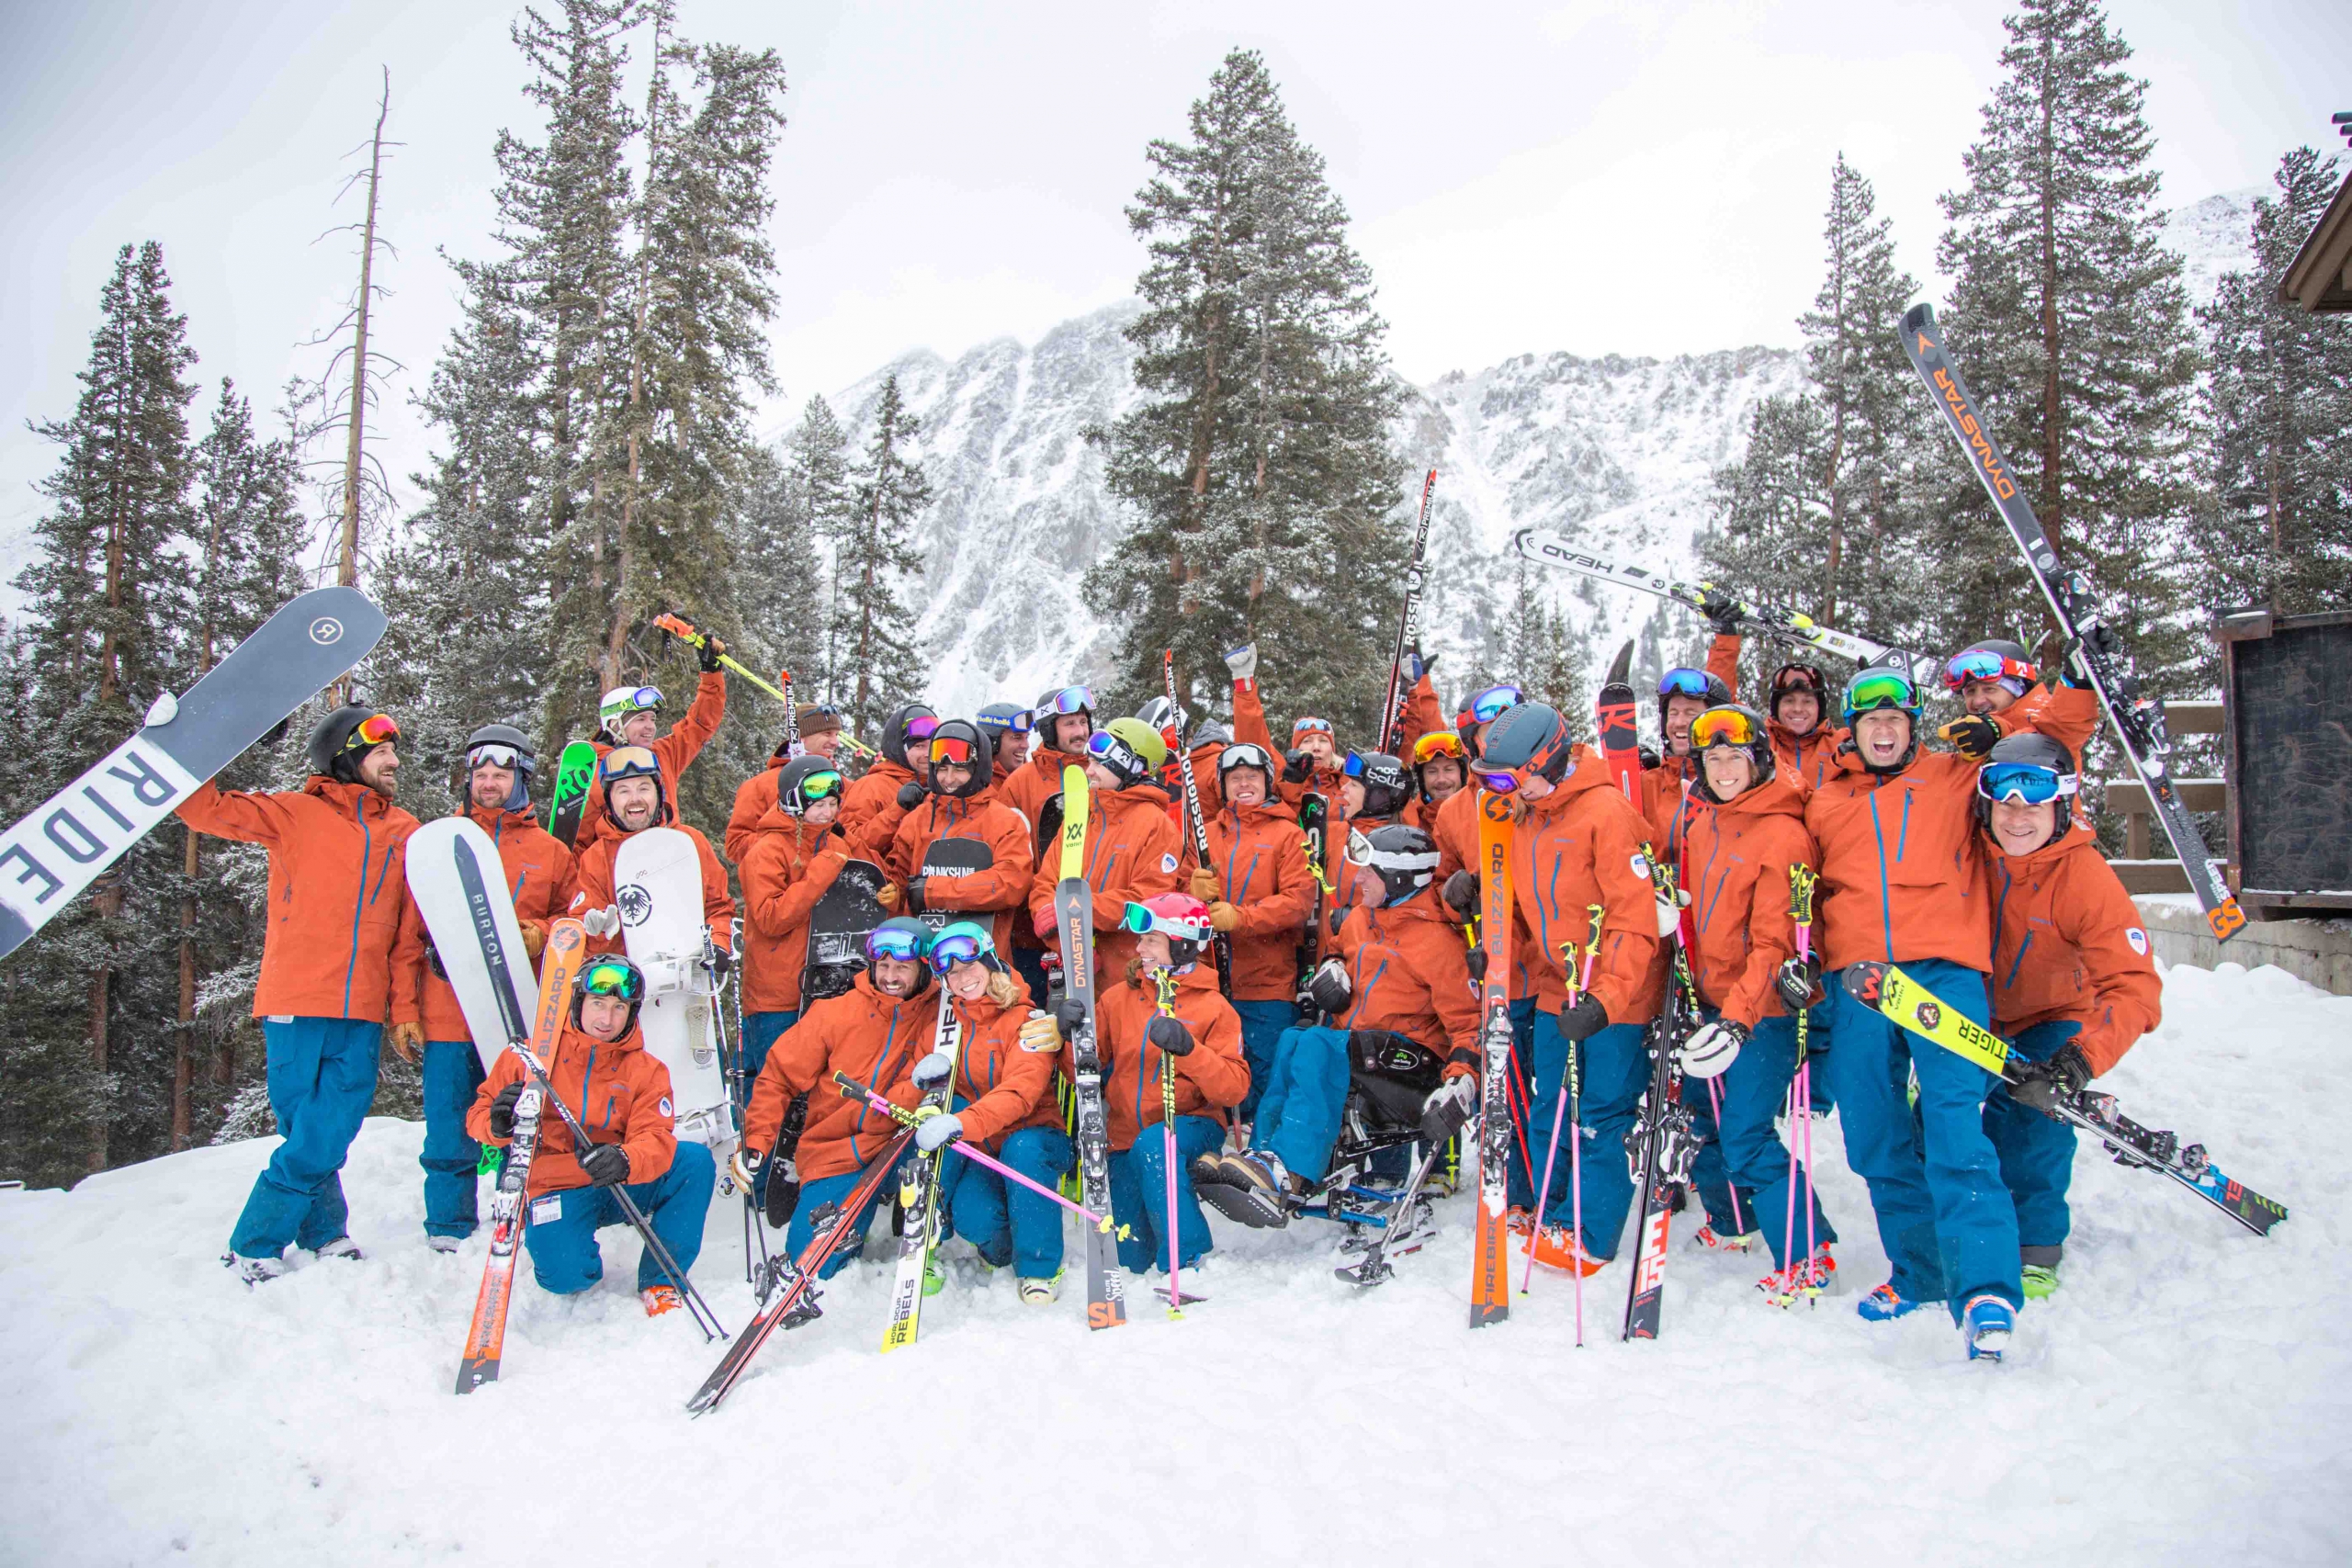 PSIA-AASI National Team celebrates outside in front of snow covered trees holding their skis and snowboards in the air